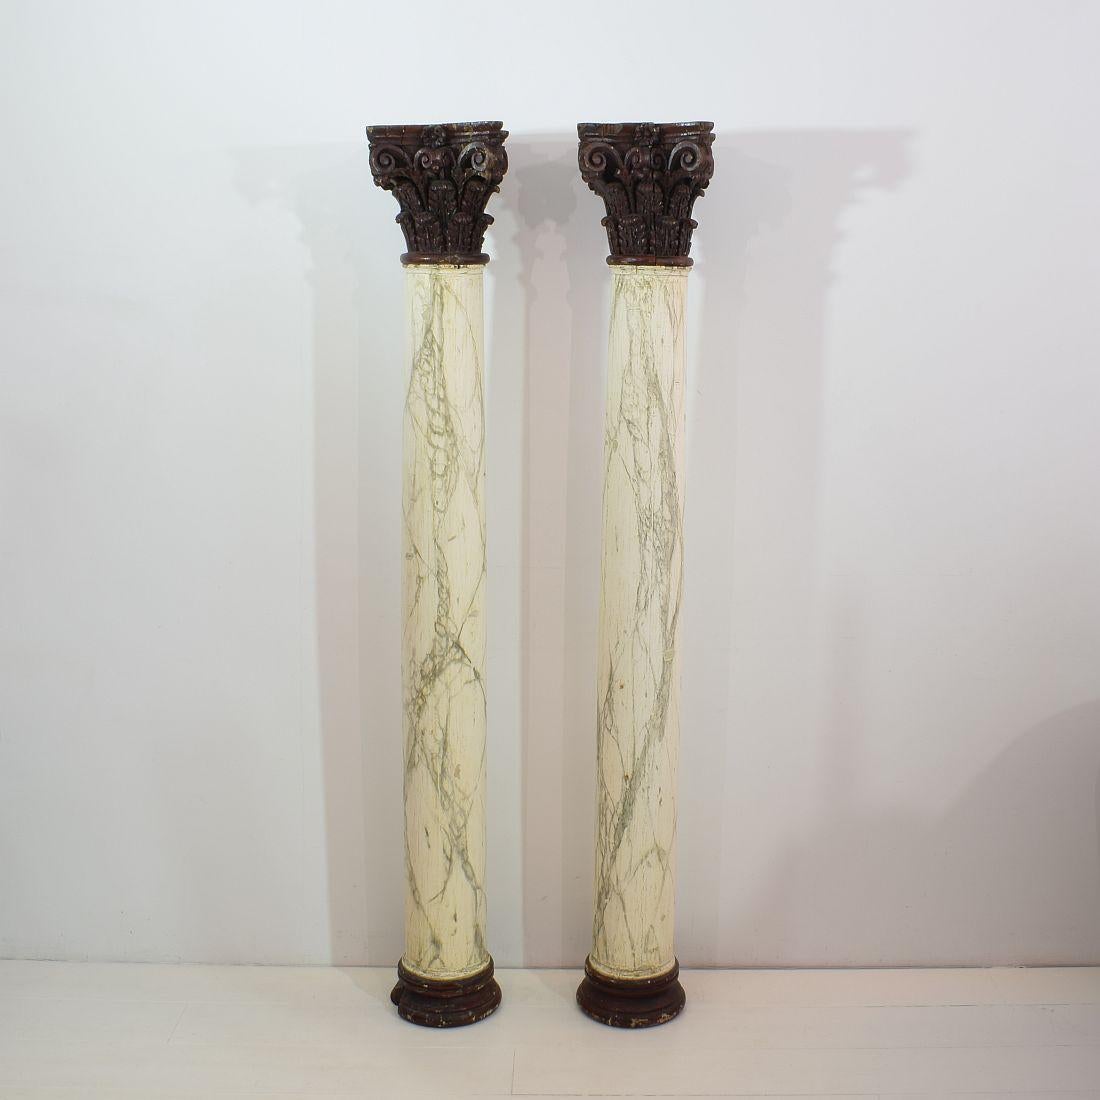 Carved Late 18th Century Large Italian Corinthian Painted Columns